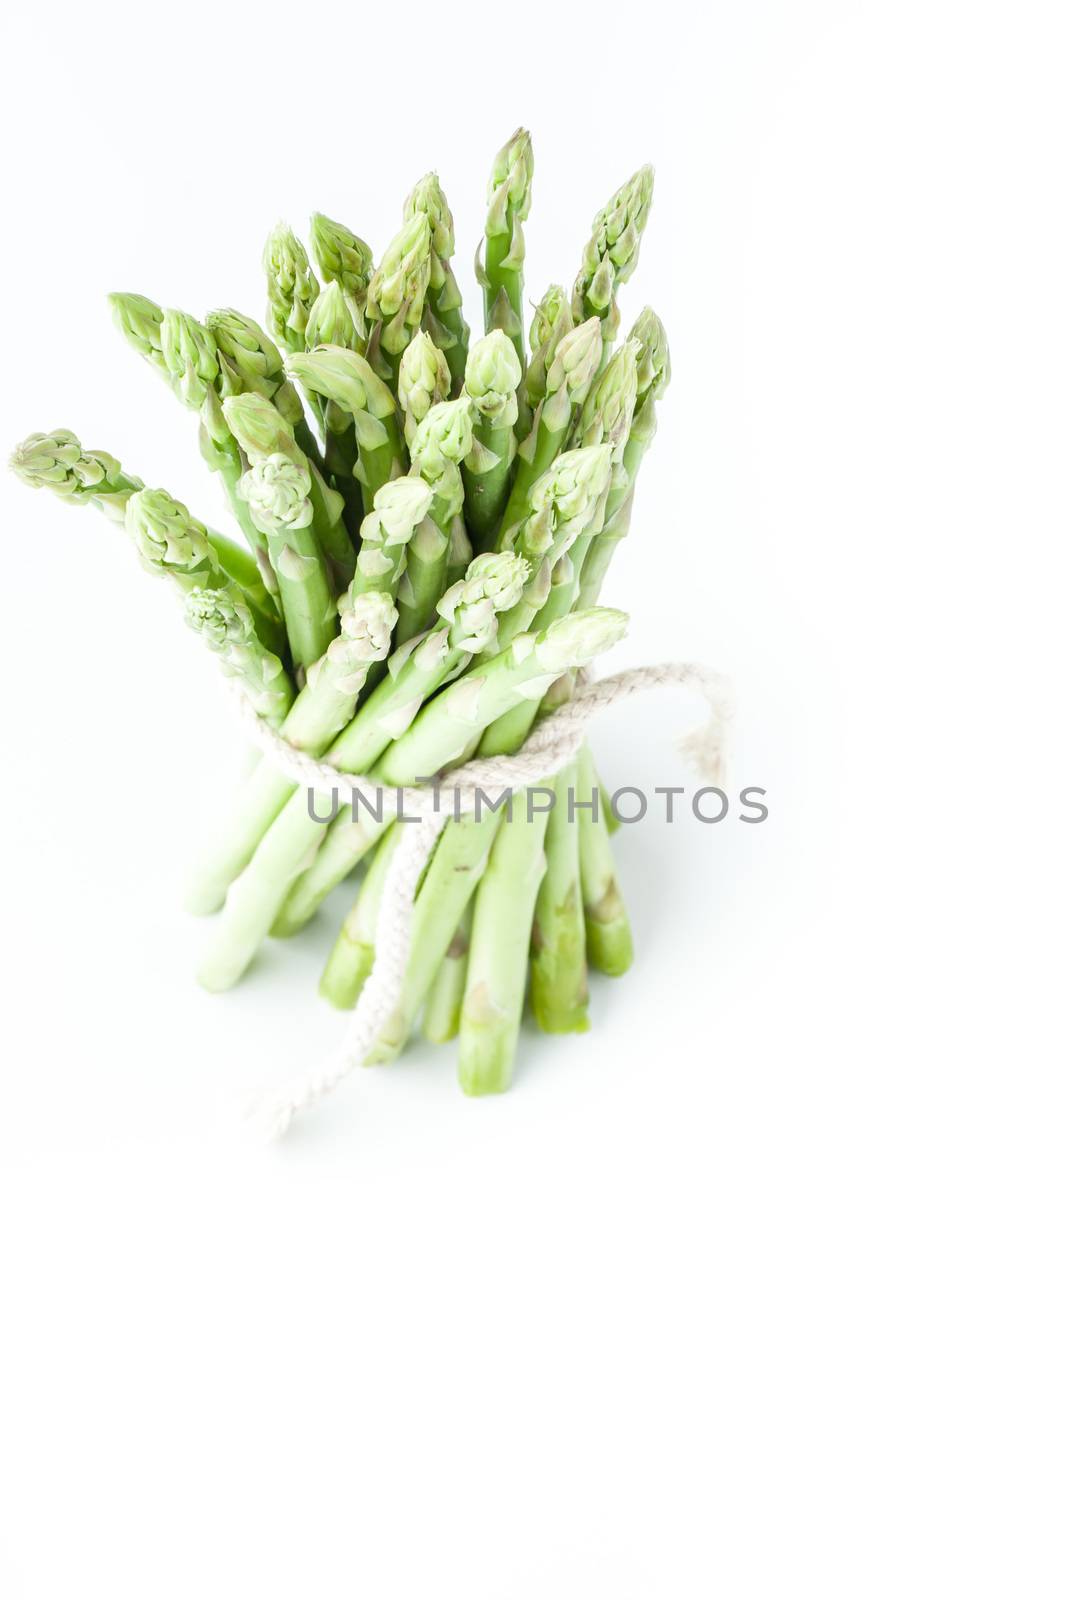 Bundle of asparagus on the white background